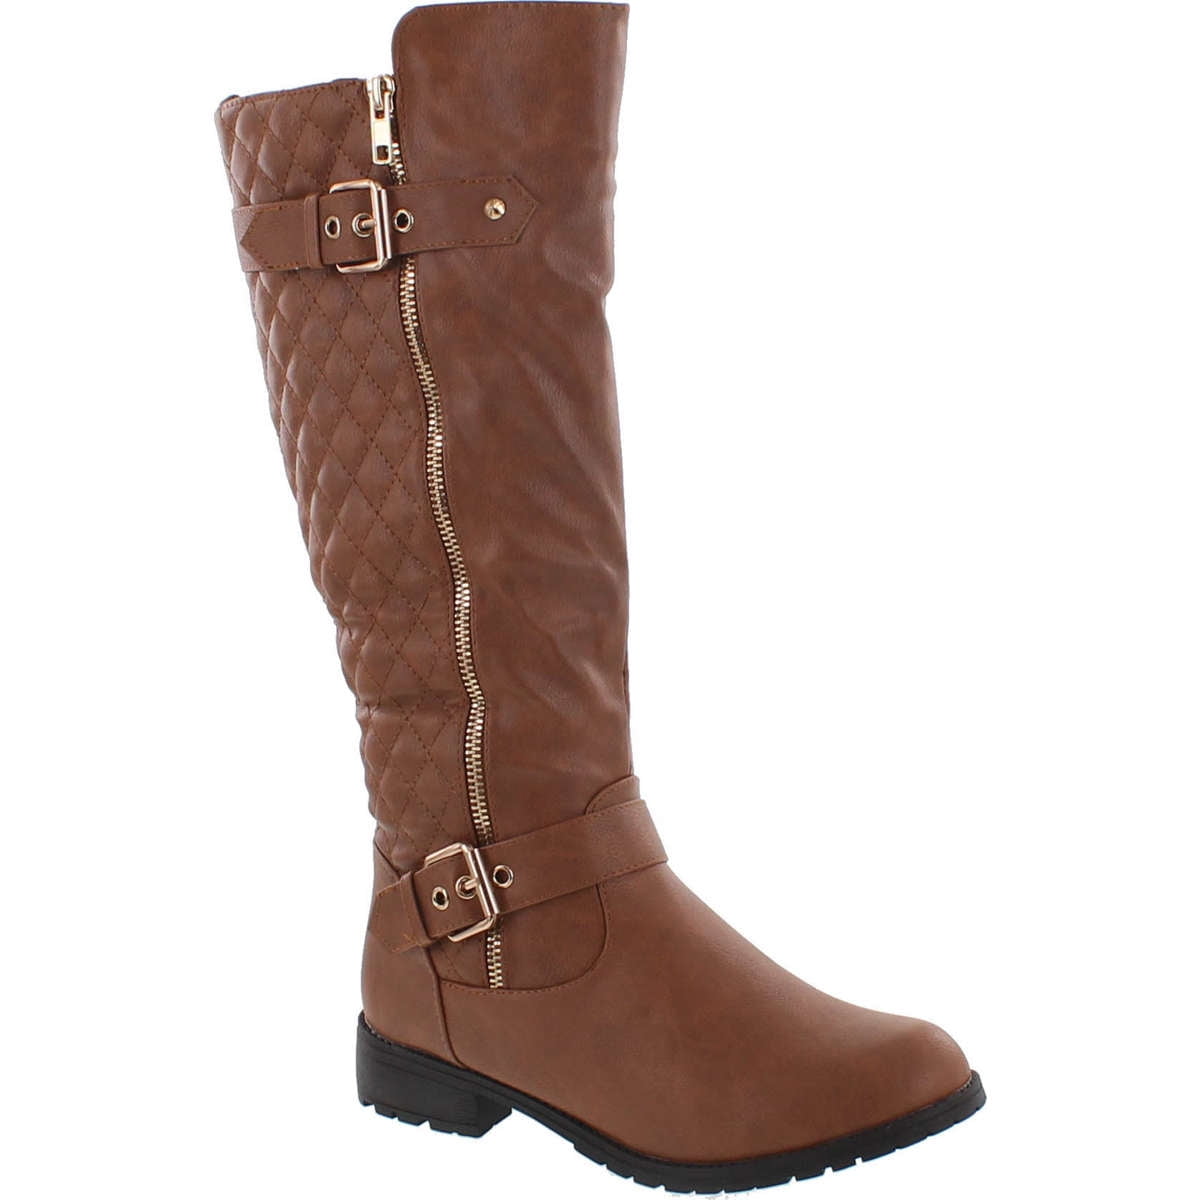 Top Moda - Top Moda Women's Bally-32 Knee High Quilted Leather Riding ...